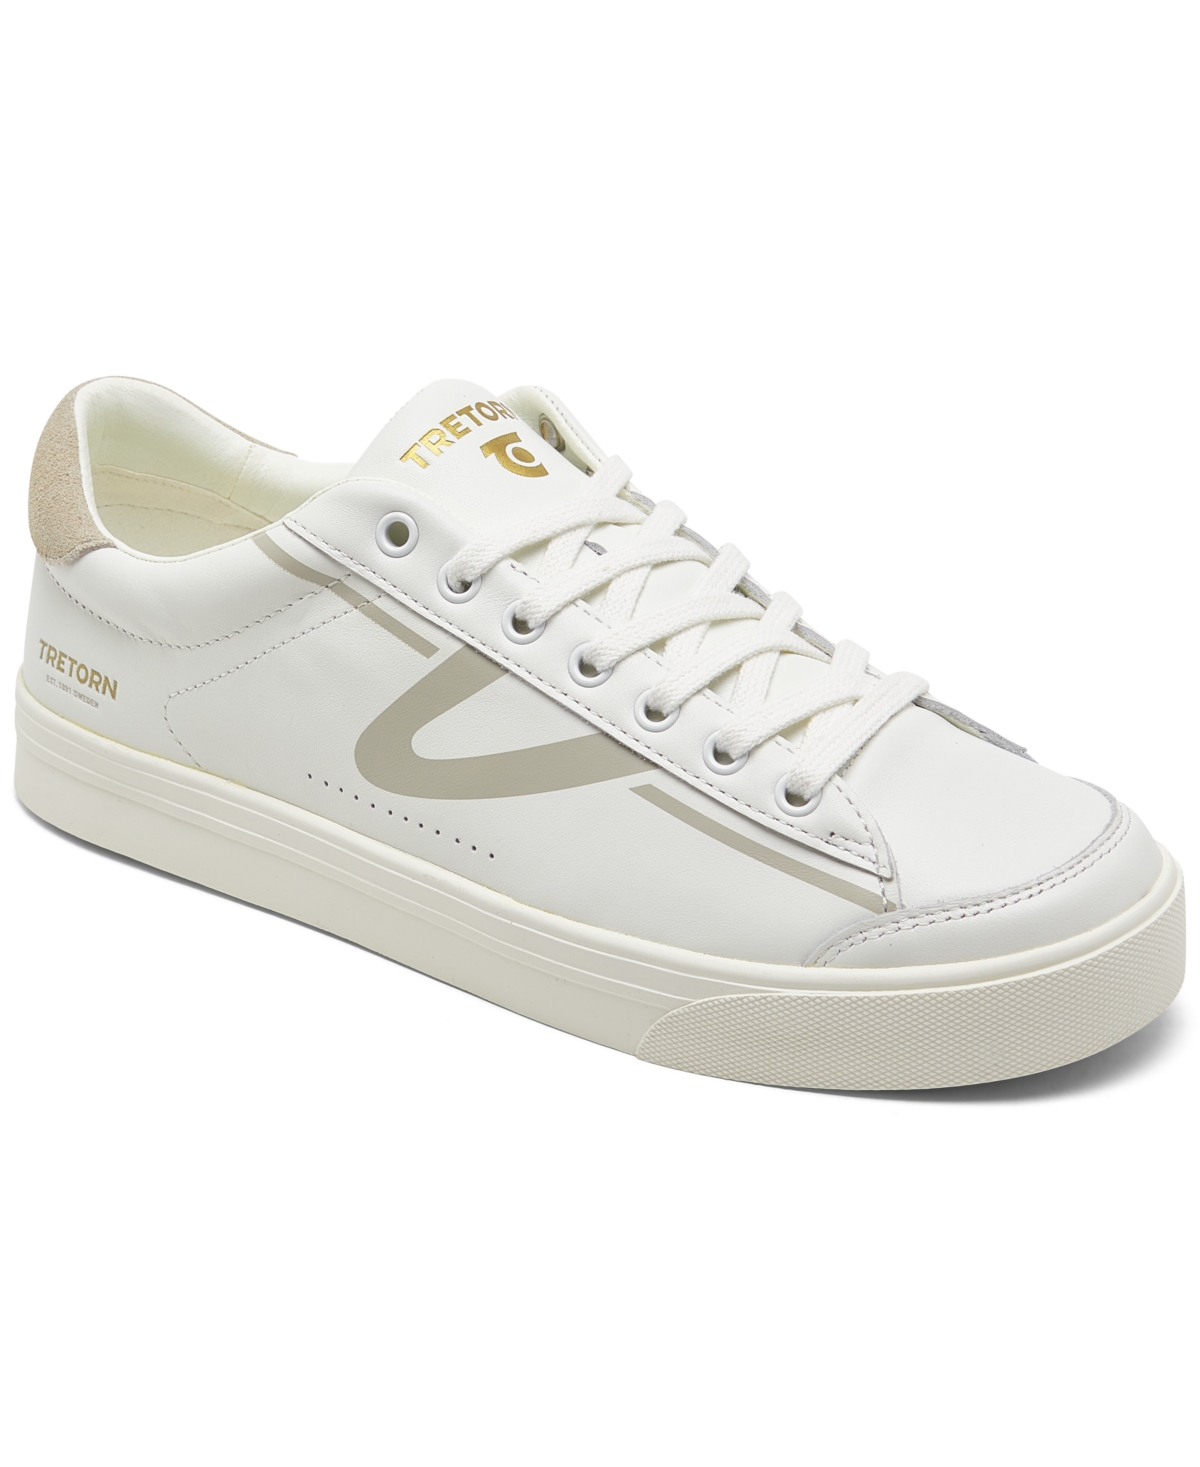 Women's Hopper Casual Sneakers from Finish Line - White/taup